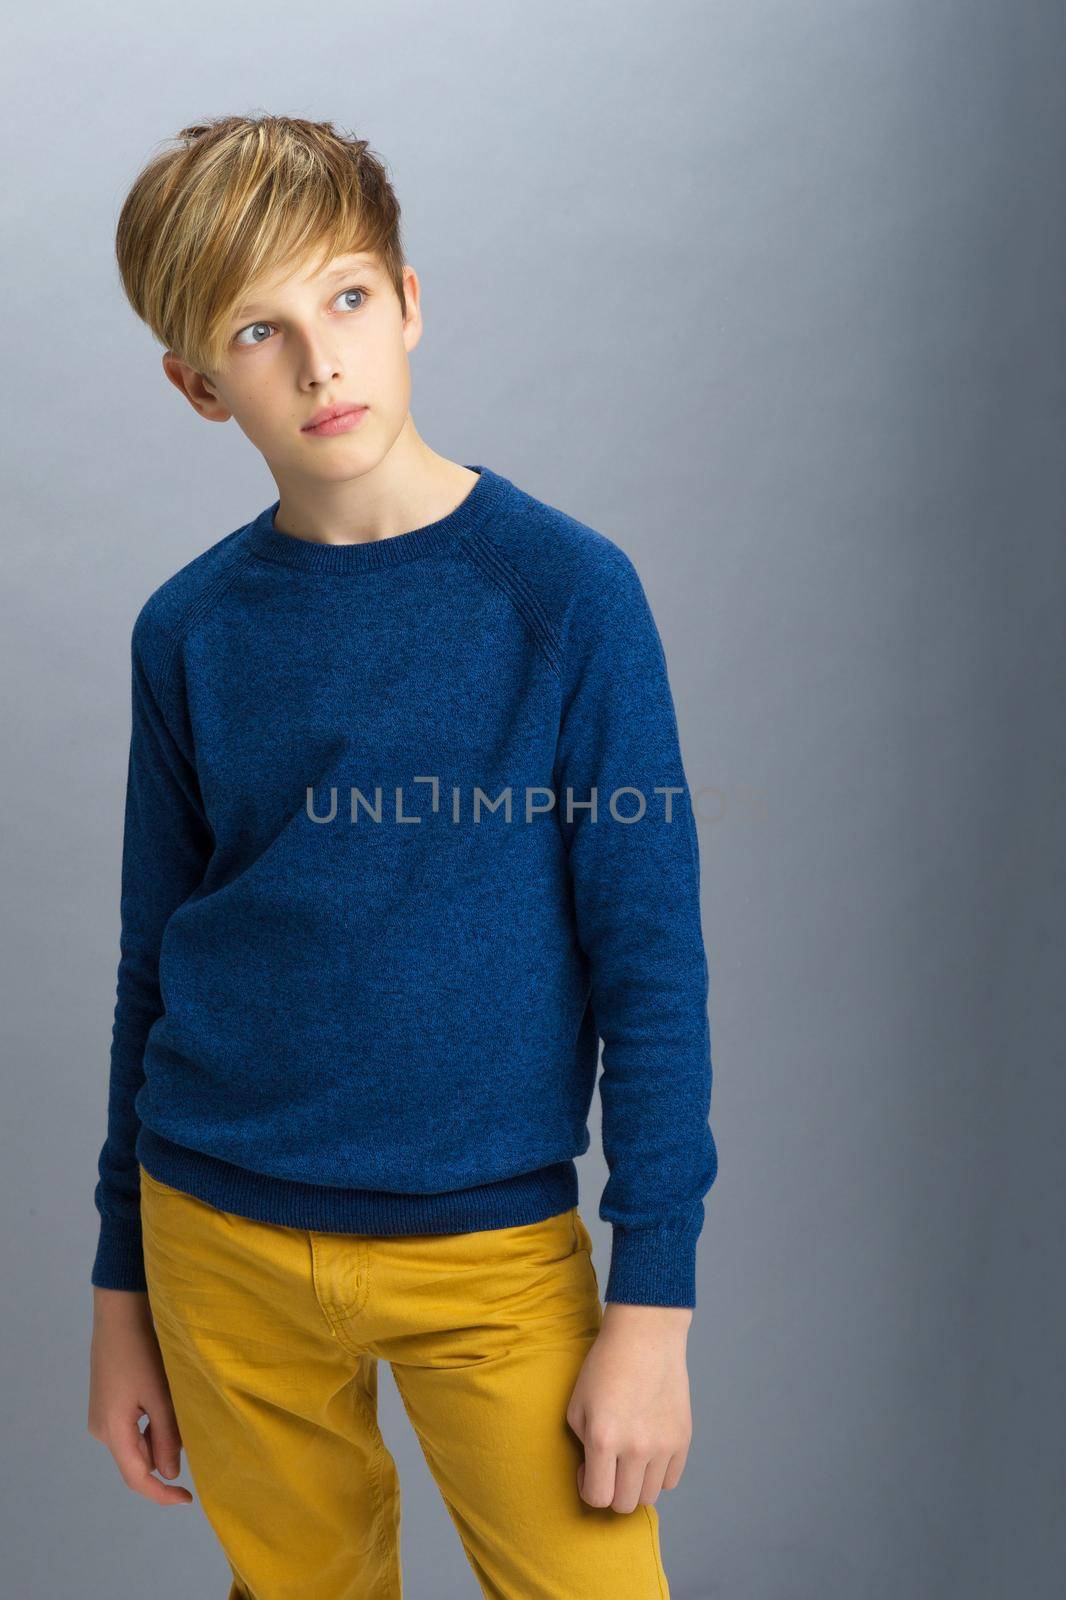 Portrait of stylish teenage boy. Handsome teenager wearing blue pullover and yellow pants posing in studio. Shot of student teenager with serious face expression